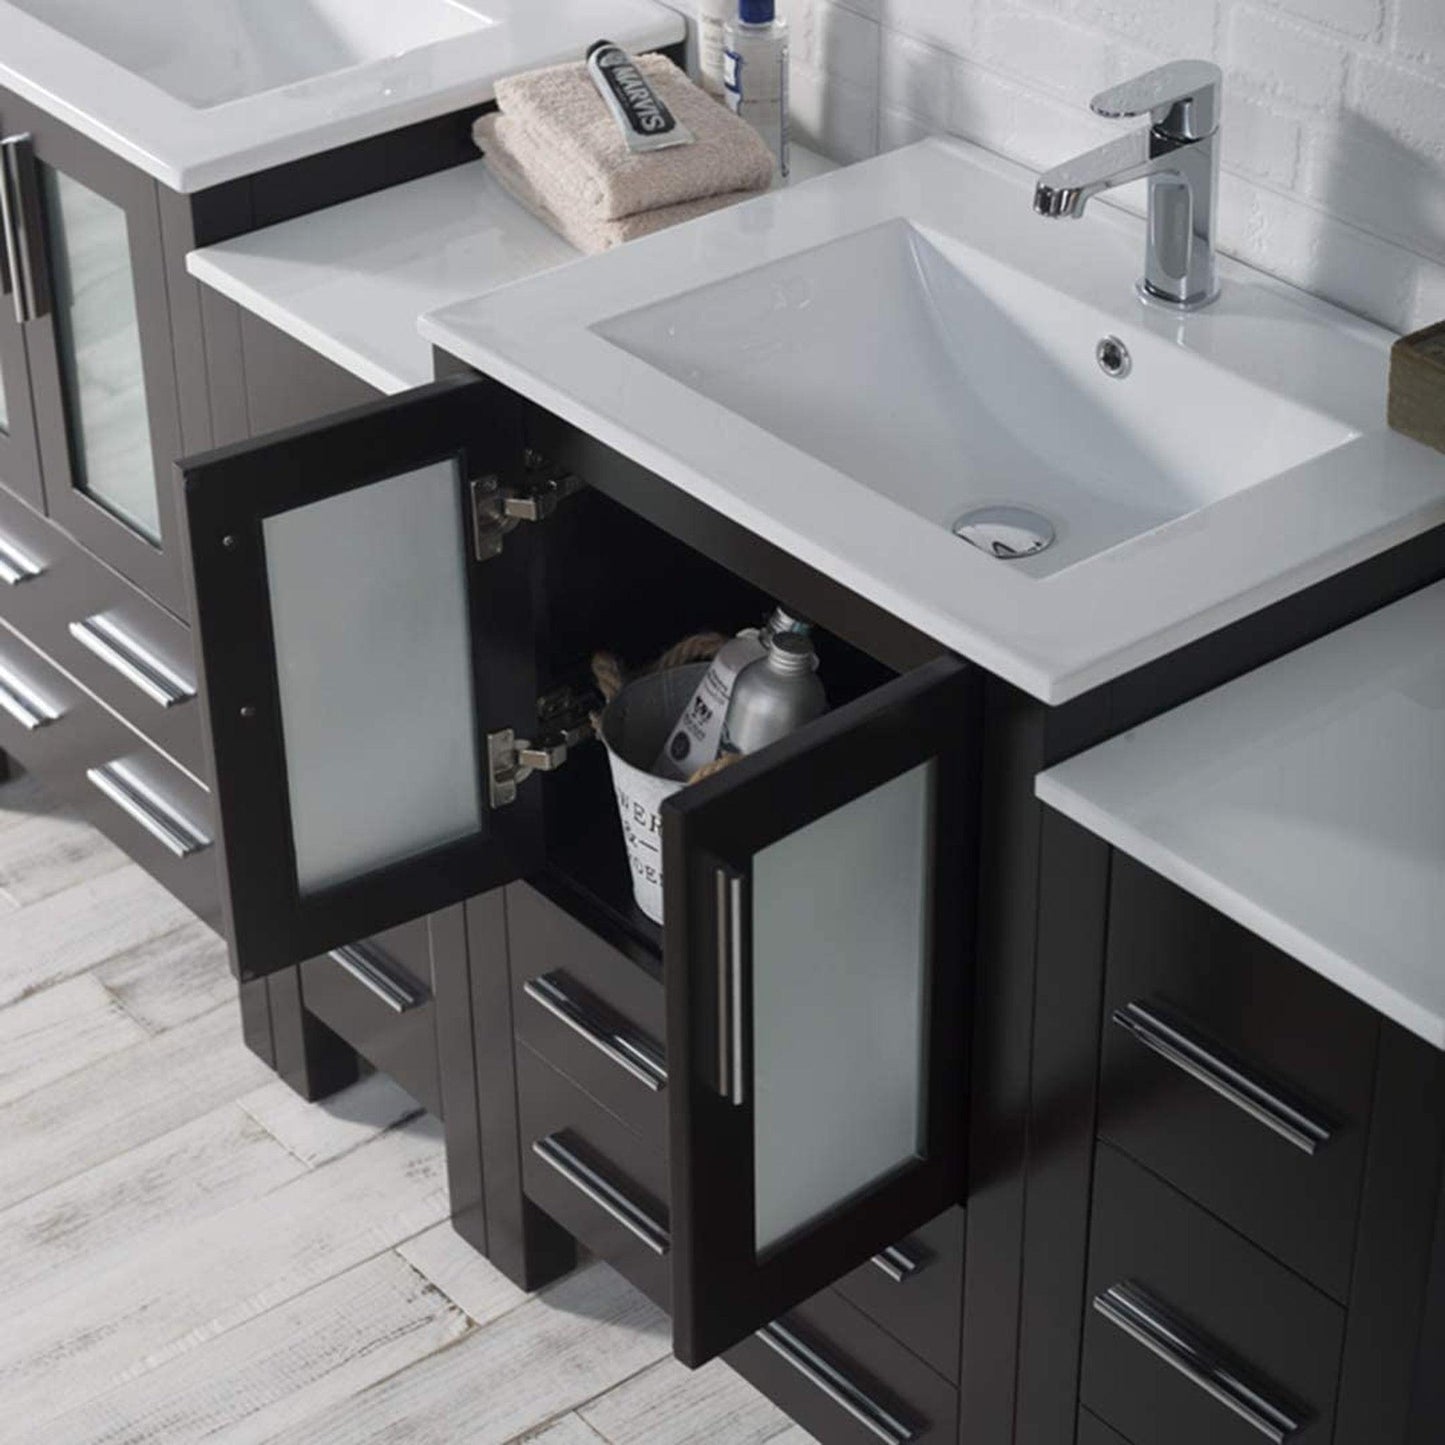 Blossom Sydney 84" Espresso Freestanding Vanity With Ceramic Top, Integrated Double Sinks, Mirror and Three Side Cabinet